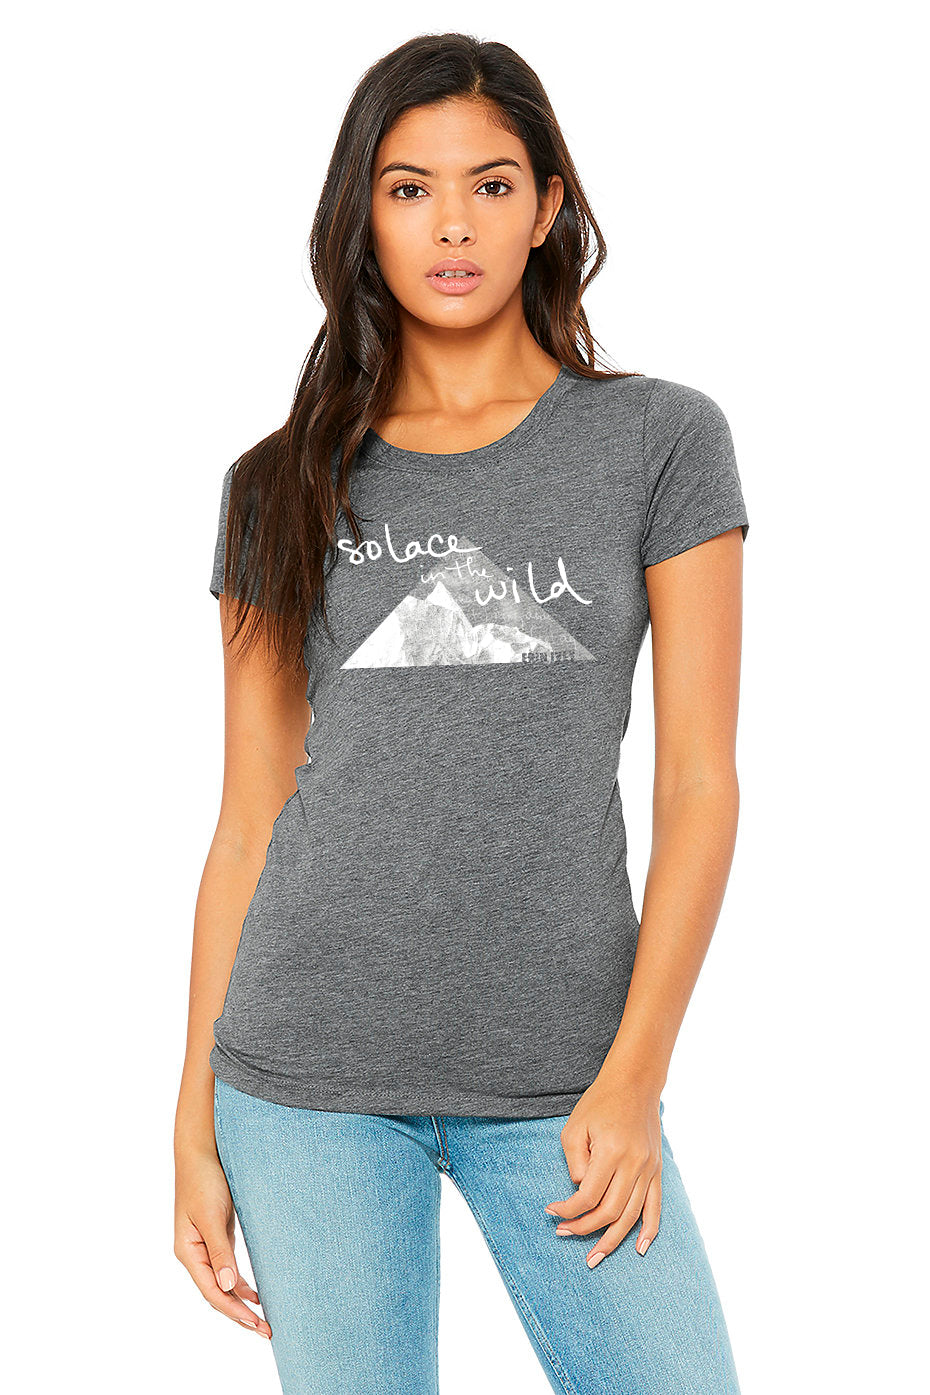 Solace in the Wild ladies gray tshirt front design